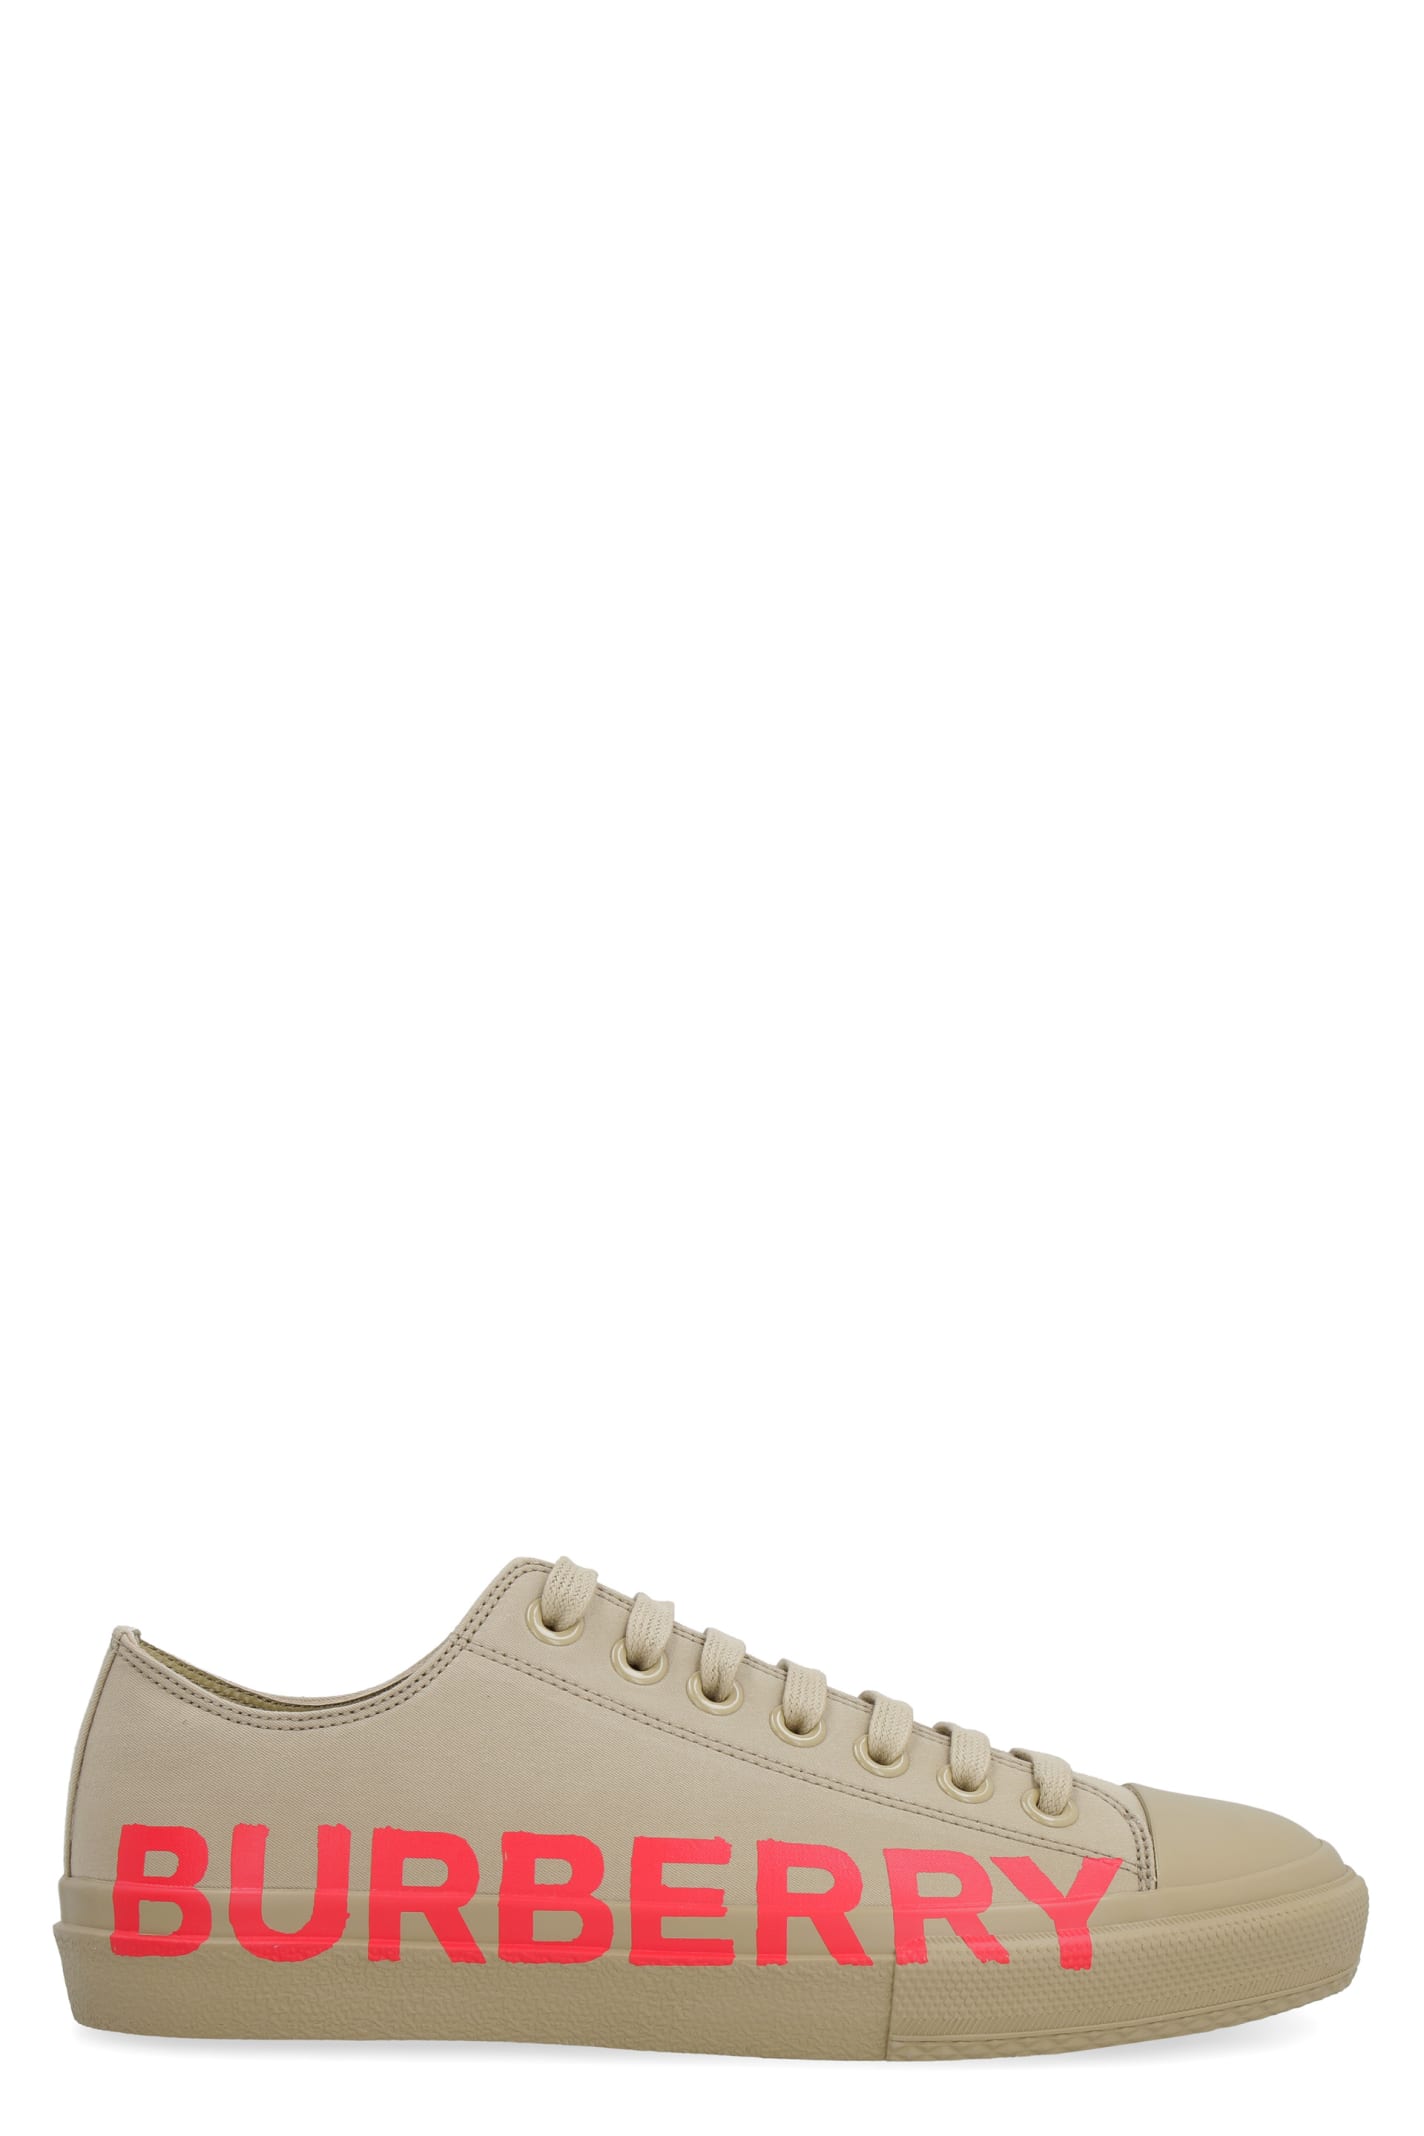 Burberry Fabric Low-top Sneakers